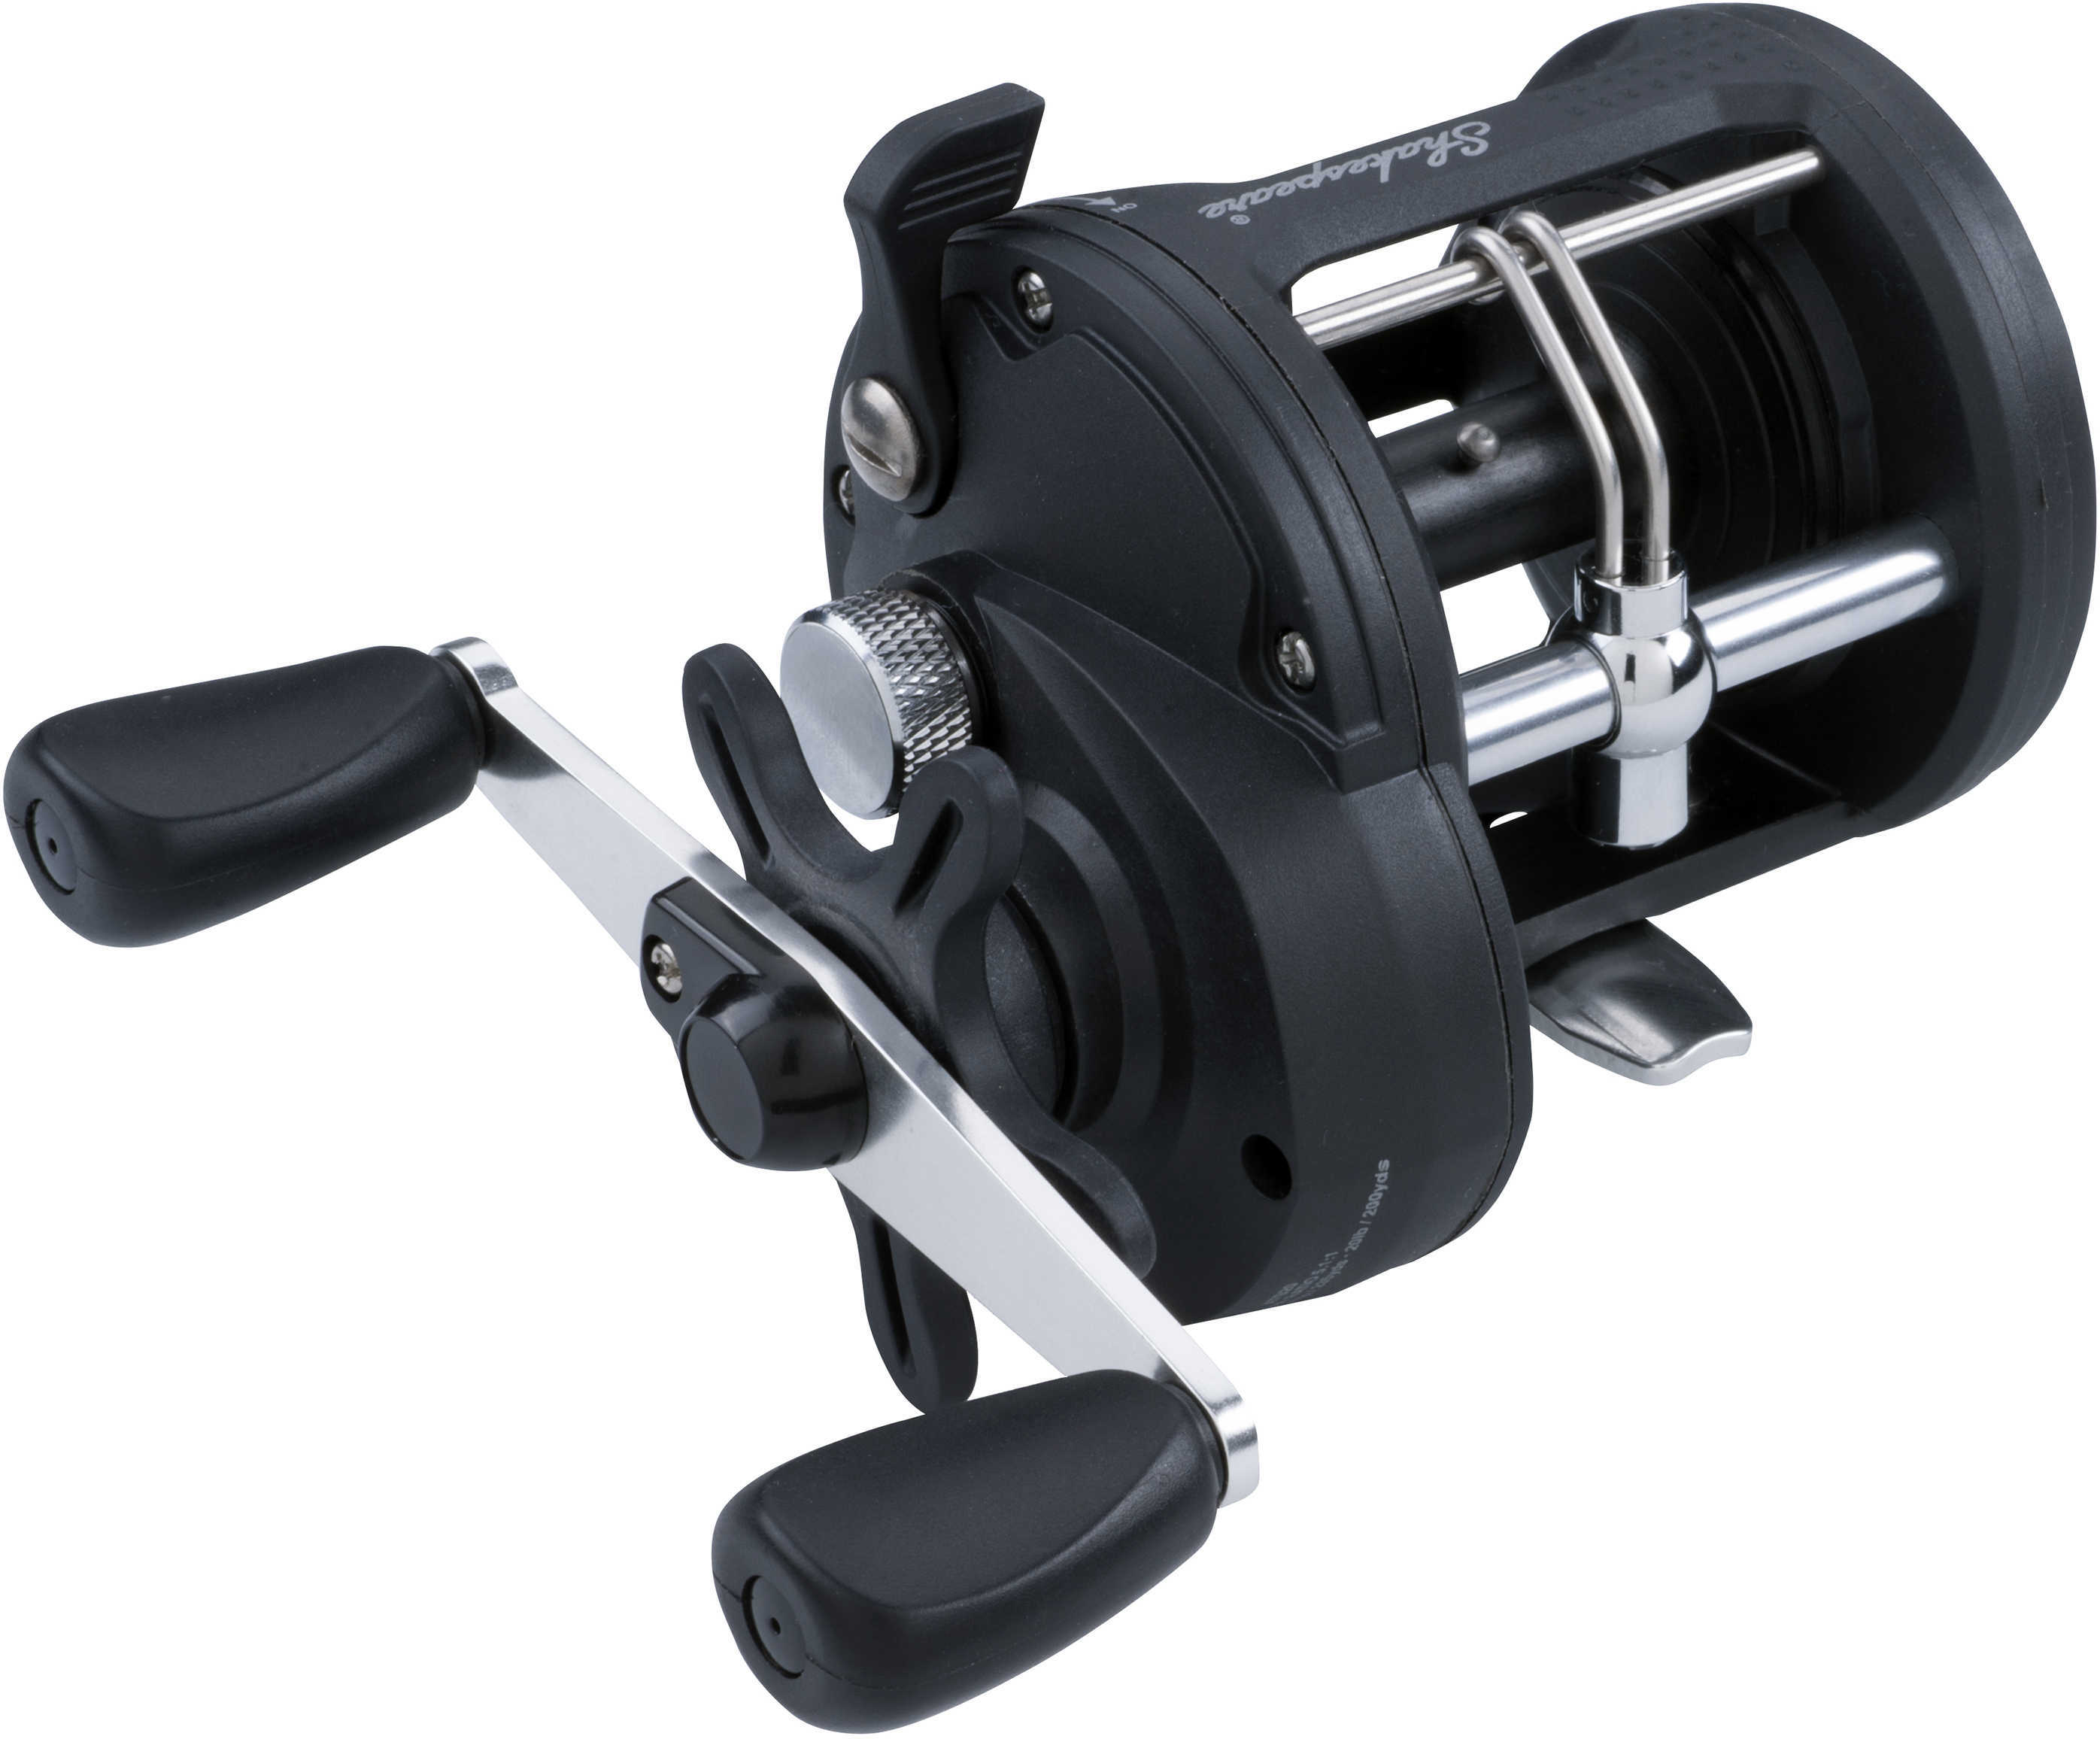 Shakespeare ATS Trolling Reels 15 5.1:1 Gear Ratio 2 Bearings lb Max Drag Right Hand Clam Package Md: 13